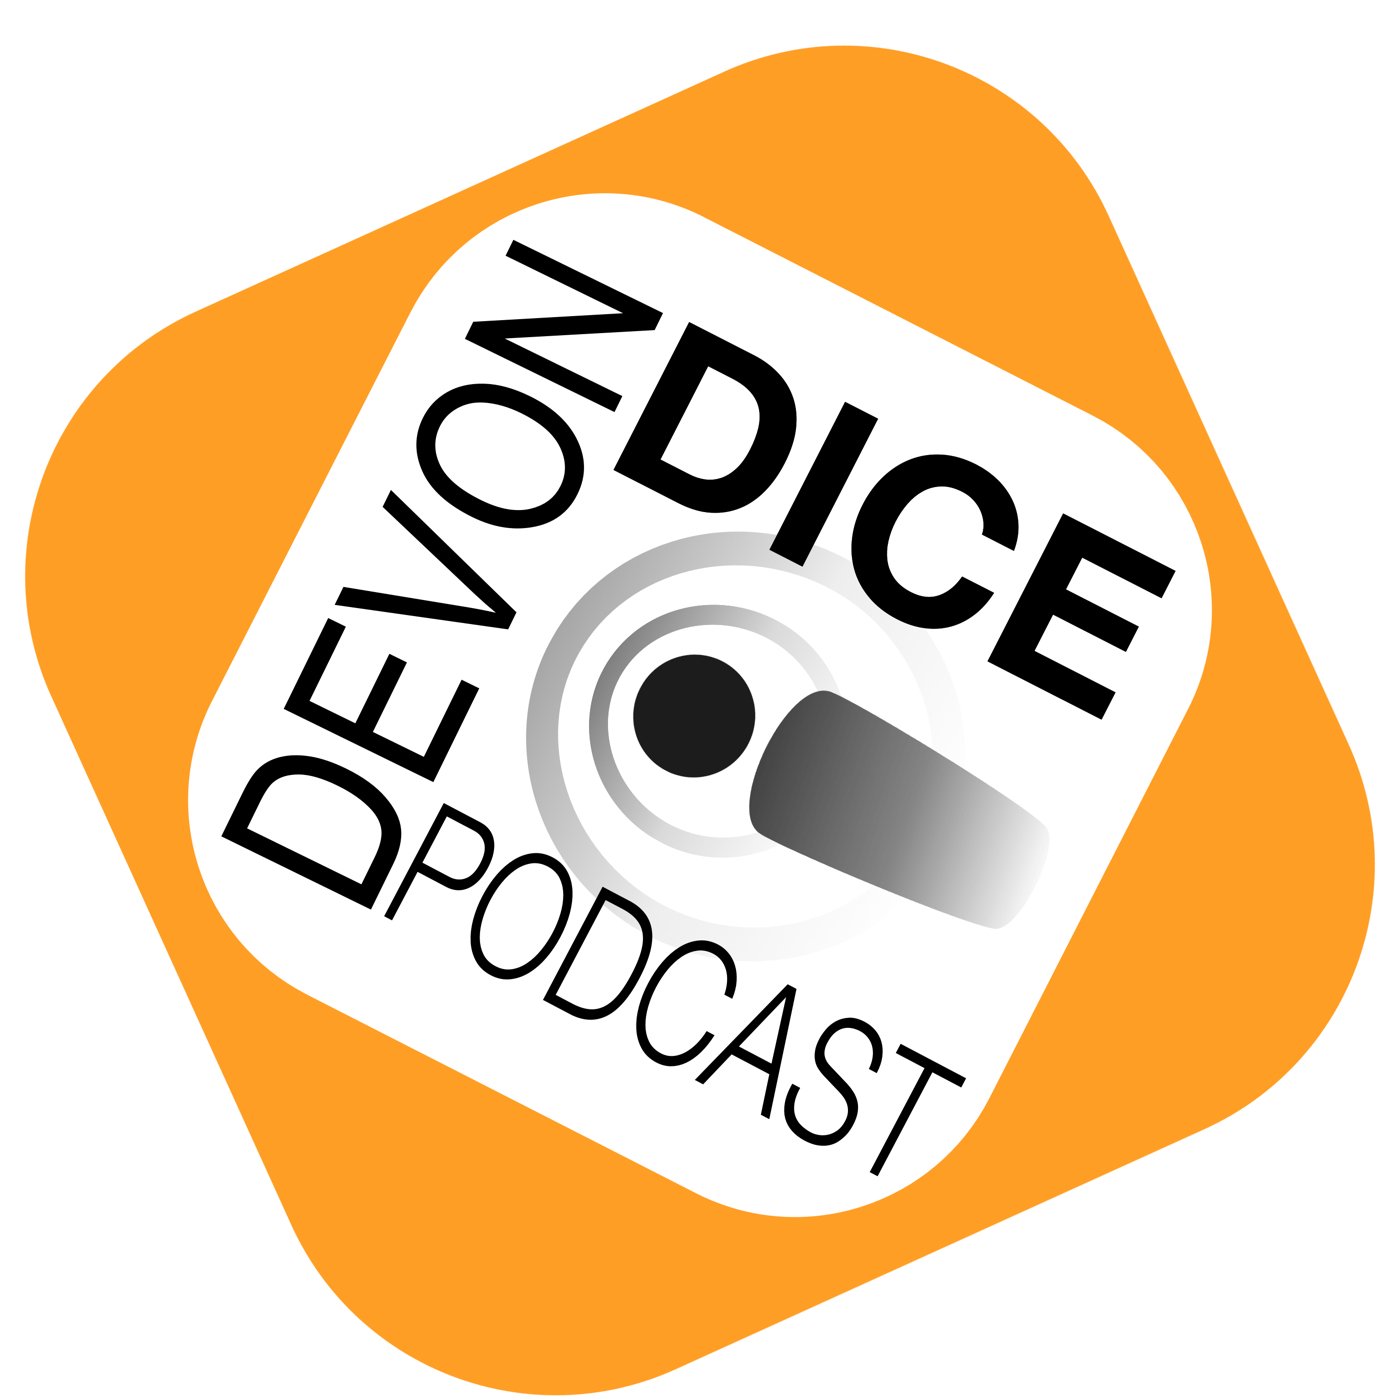 17. Devon Dice podcast Room Escaping, Surfing, Murder, space surviving and Klask…